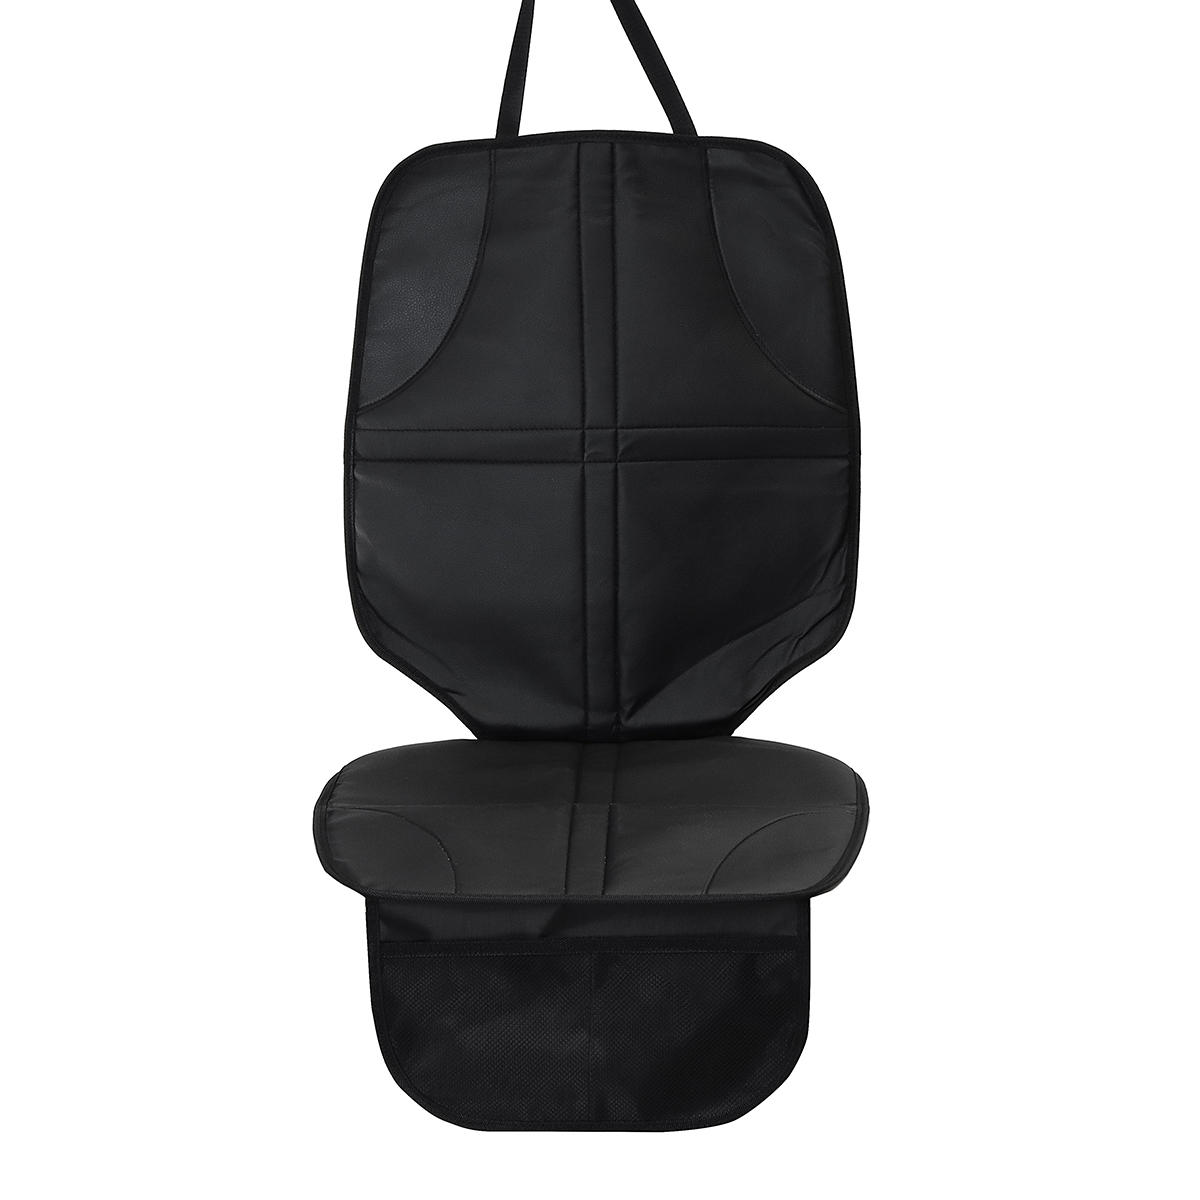 Single Long Black 55cm Leather With Pocket baby Car Seat Cushion Non-slip Wear-resistant Anti-dirty Waterproof Pad